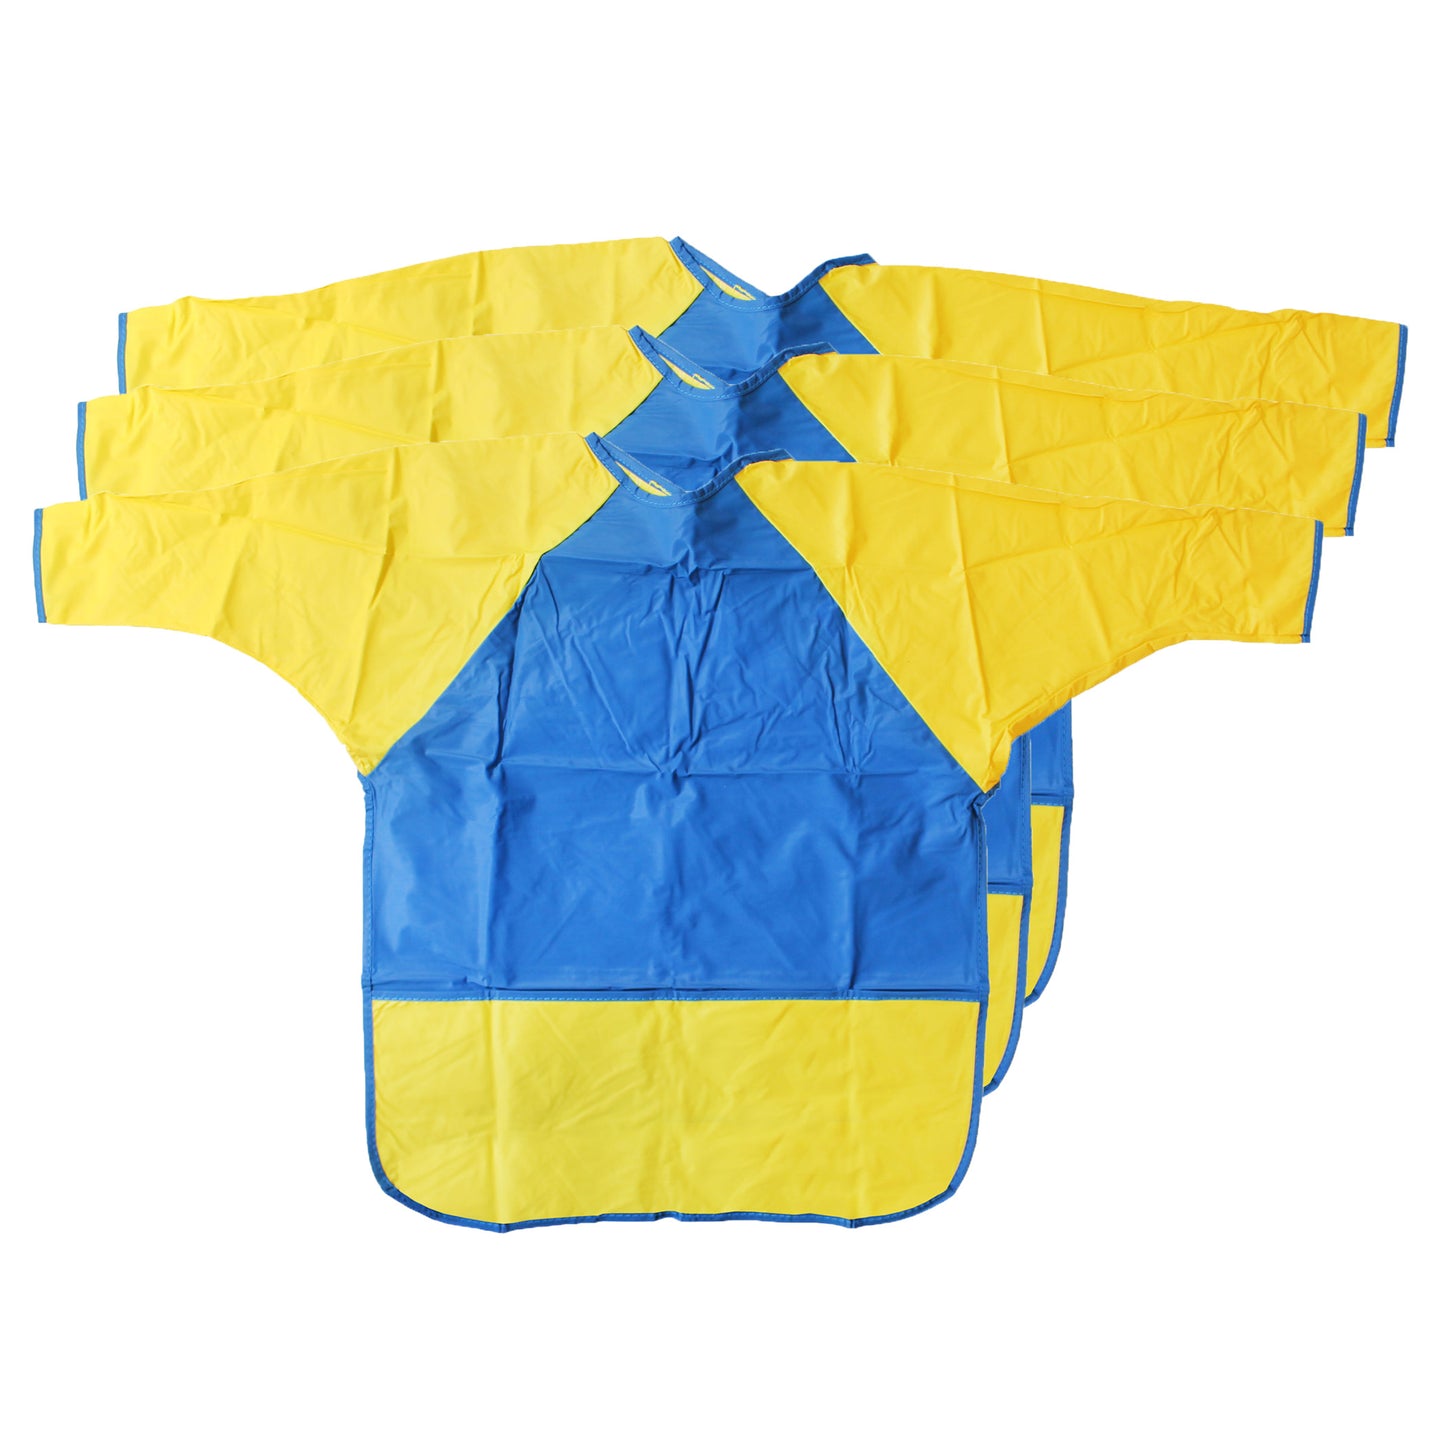 KinderSmock™ Full Protection, Ages 3-6, Pack of 3